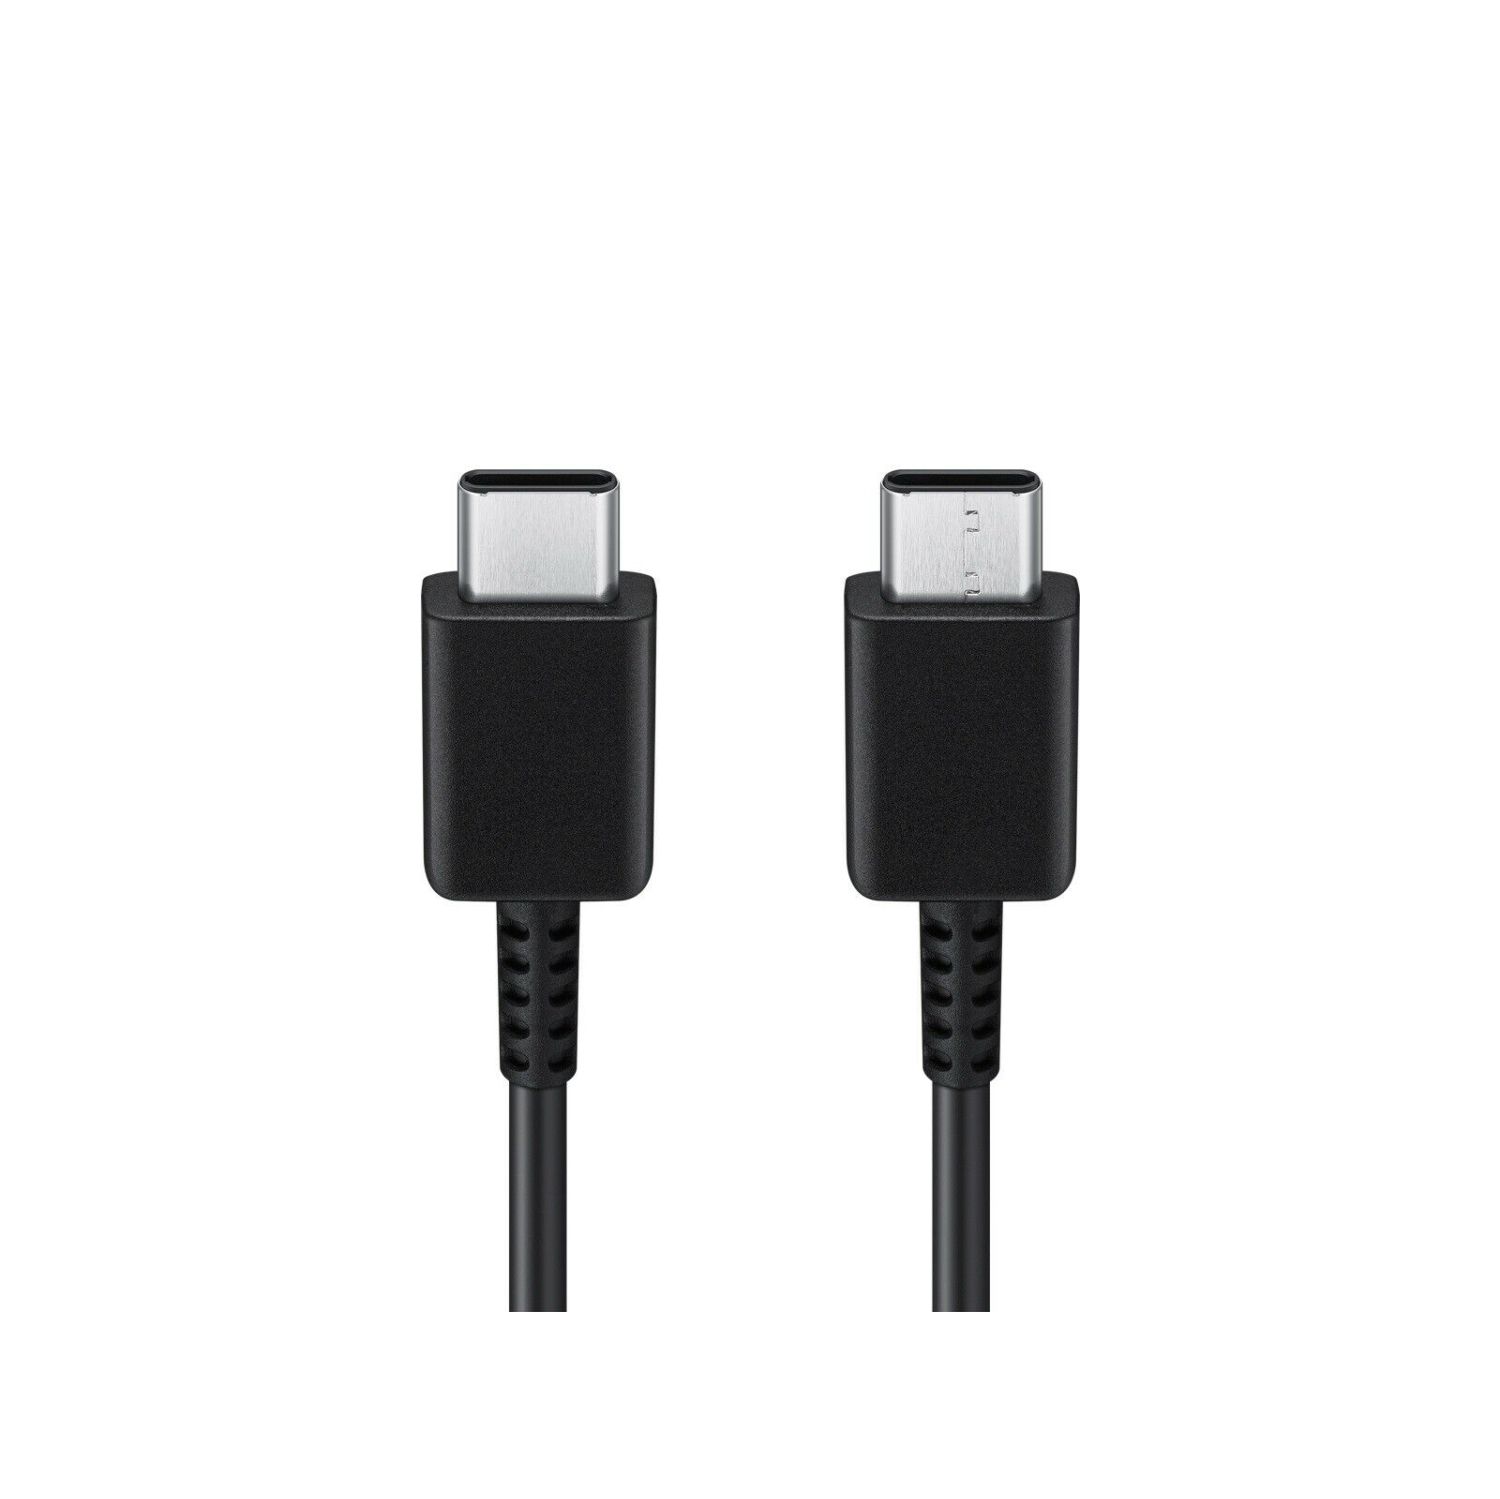 3.3Ft USB-C to Type-C Fast Charging Cable Cord for Samsung Galaxy S10 S20 Note 9 10, Google Pixel, LG G7 G8, Moto G6 G7, Black